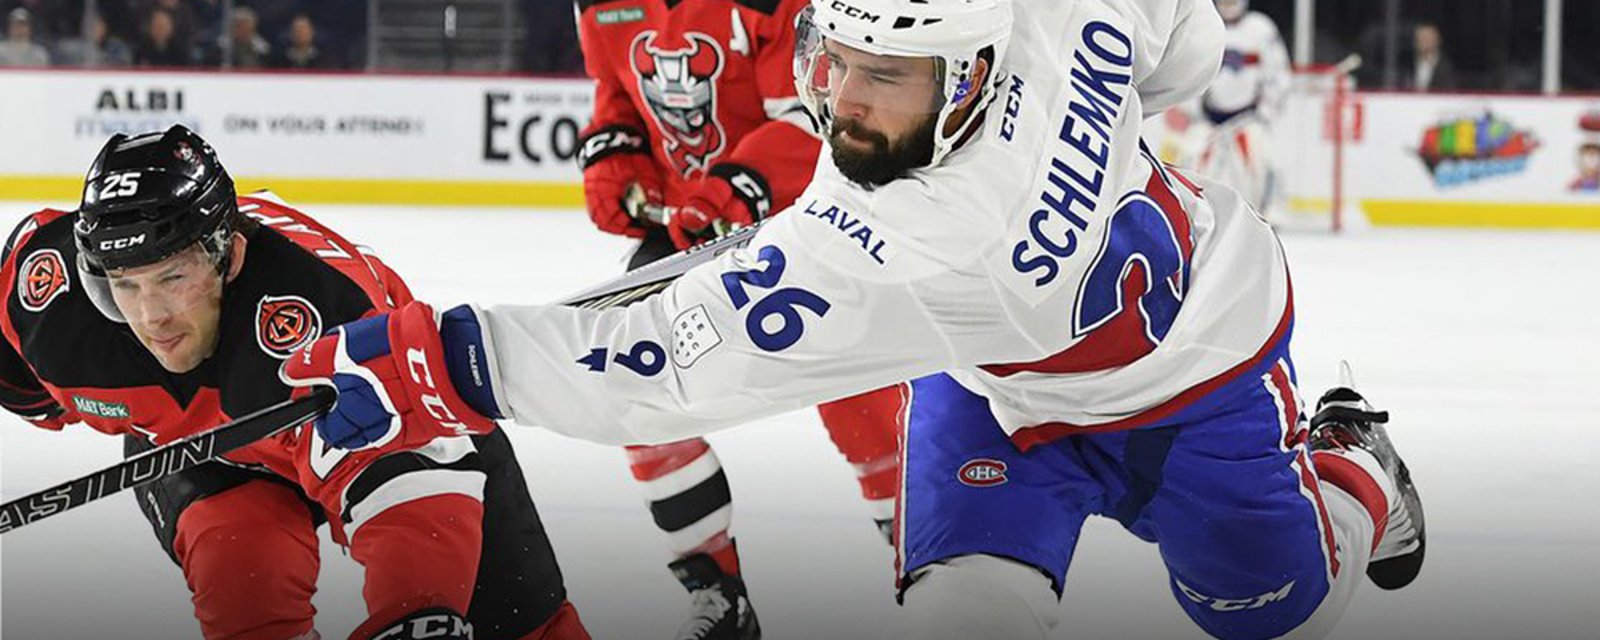 Breaking: Montreal announce a roster move